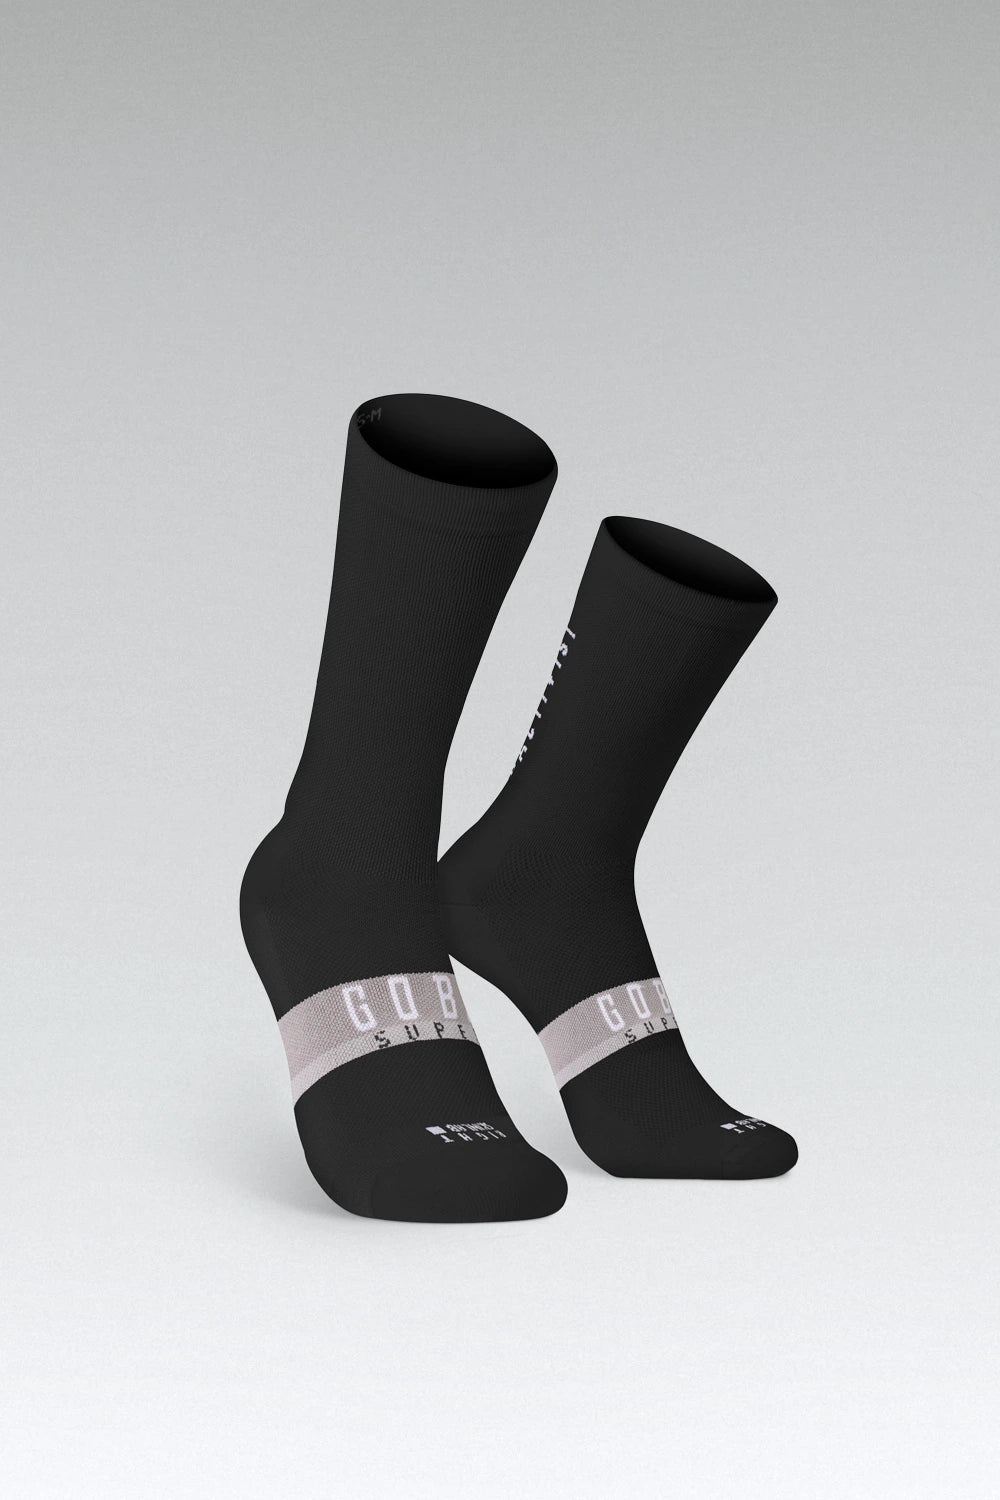 CHAUSSETTES SUPERB UNISEX BLACK AXIS EXTRA LONG